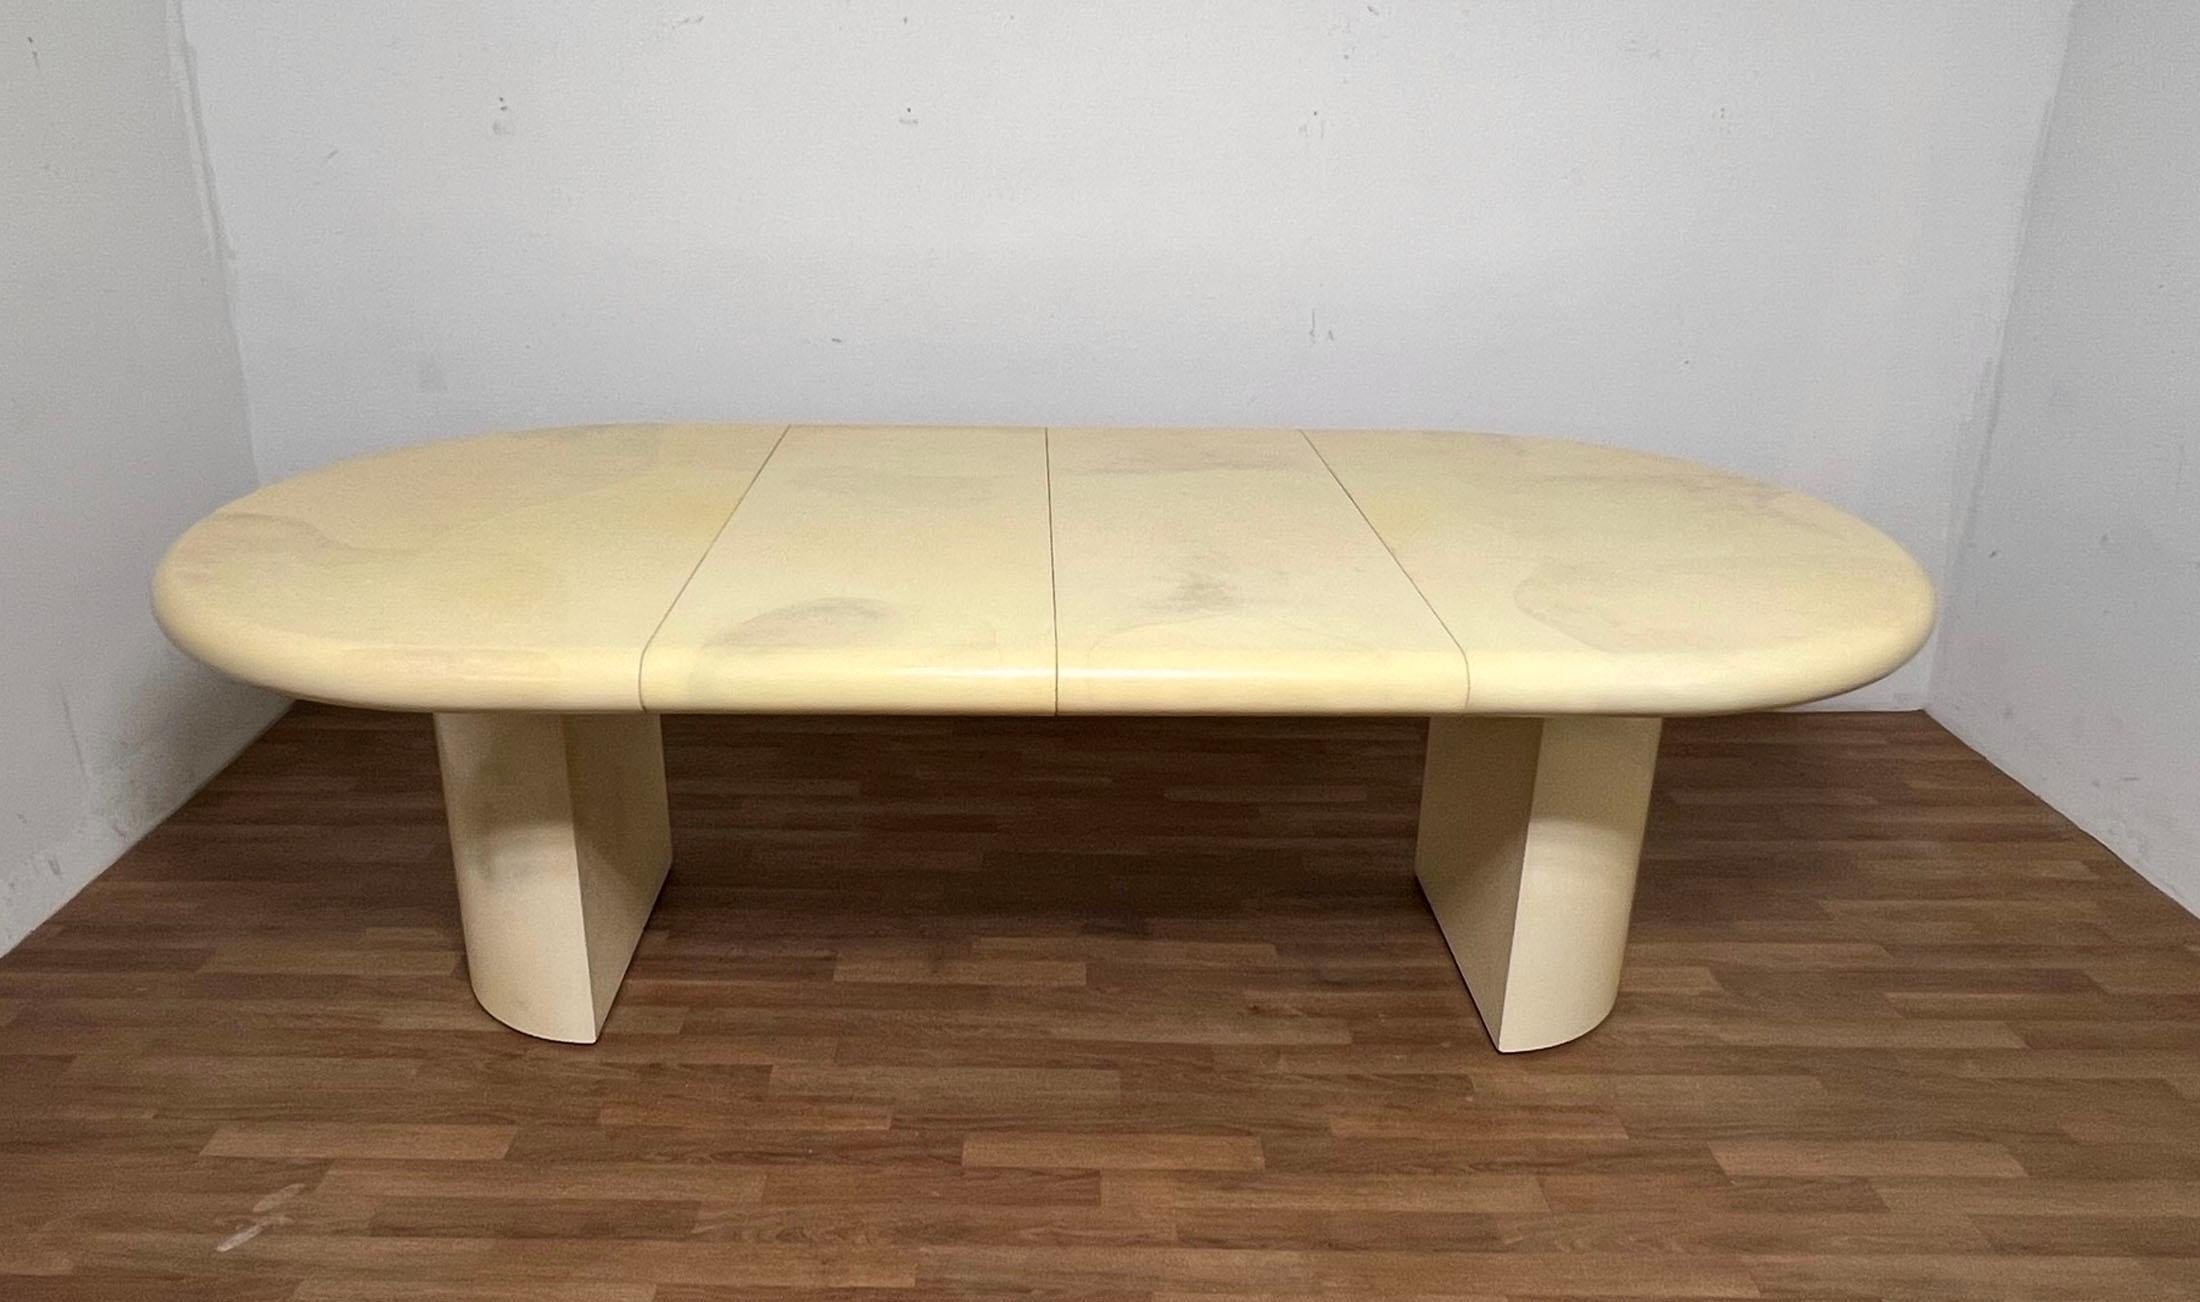 American Faux Goat Skin Lacquered Dining Table With Two Leaves, Circa 1980s For Sale